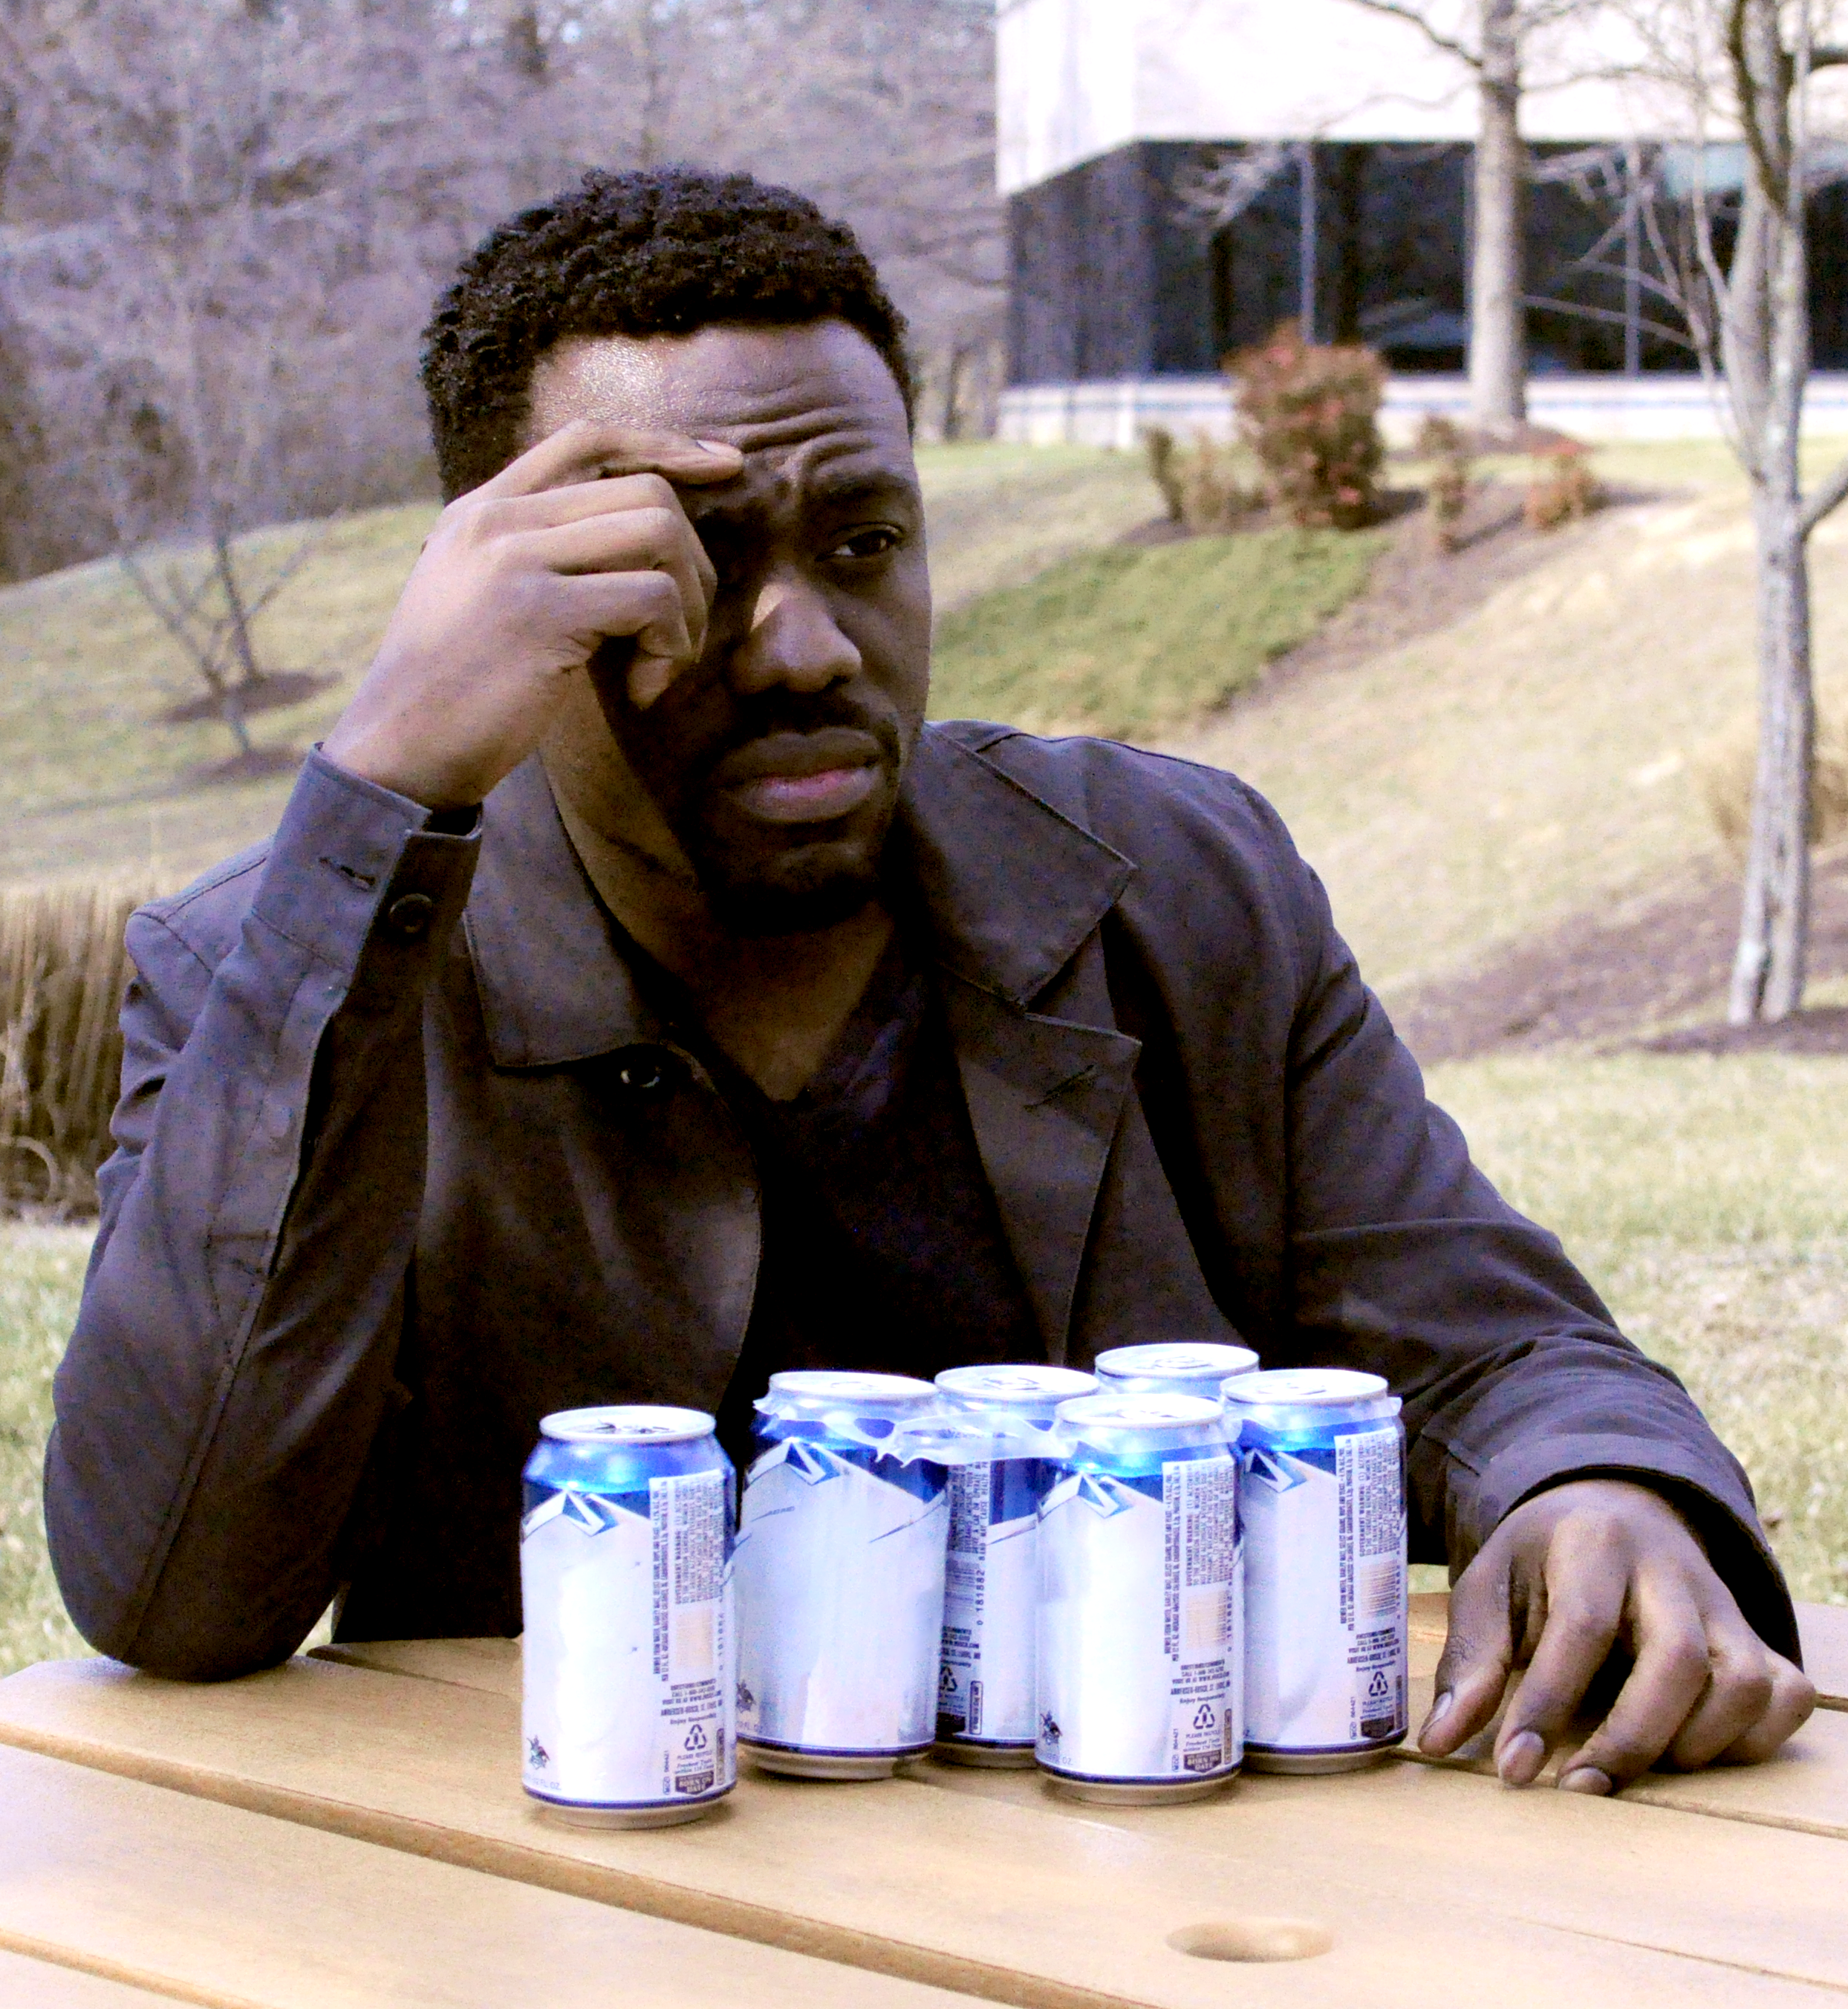 Virtual Human Role-Player Gabe thinking outside with Beer Cans on a table